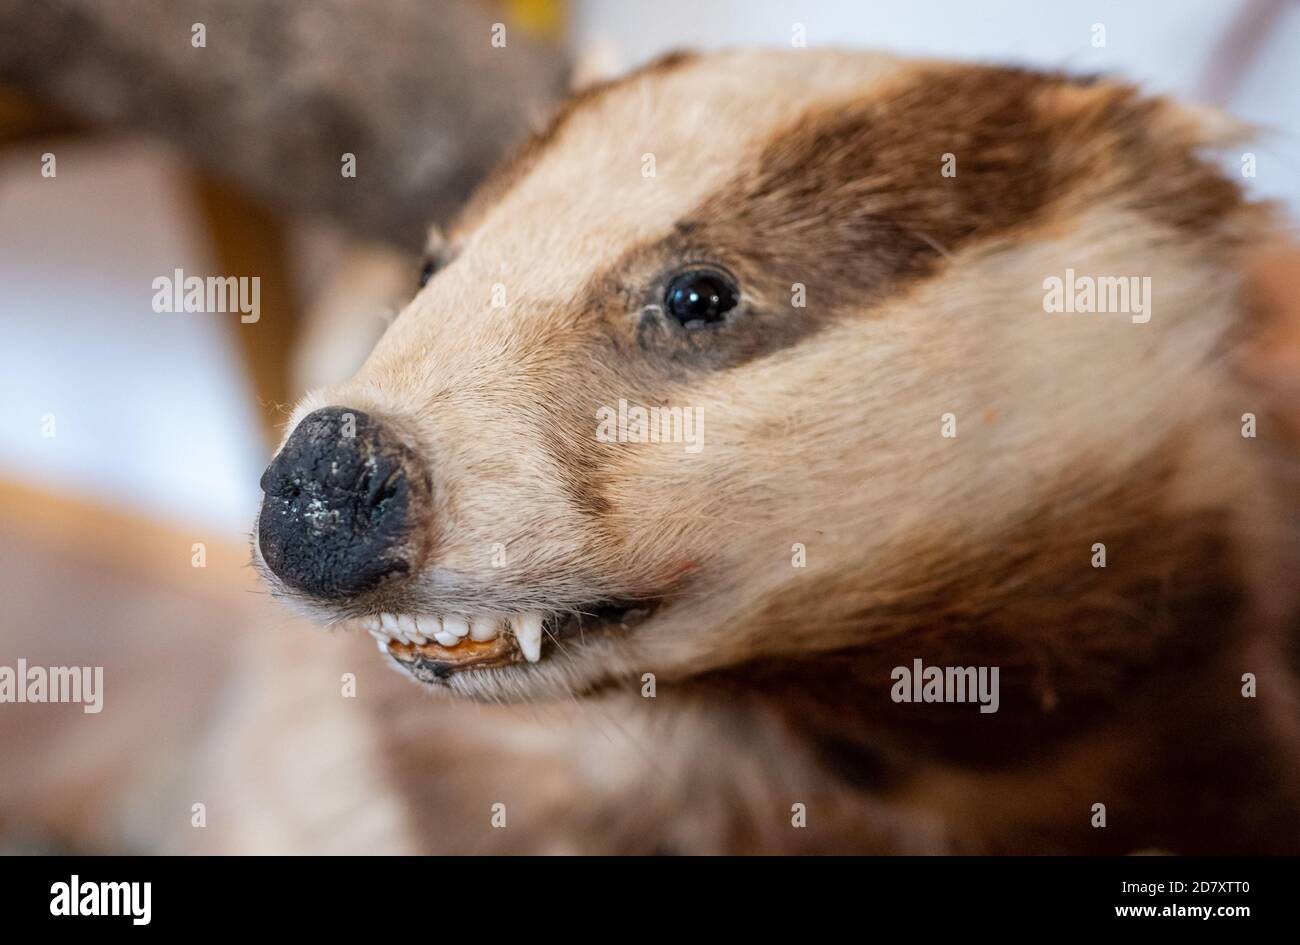 European badger in a museum Stock Photo